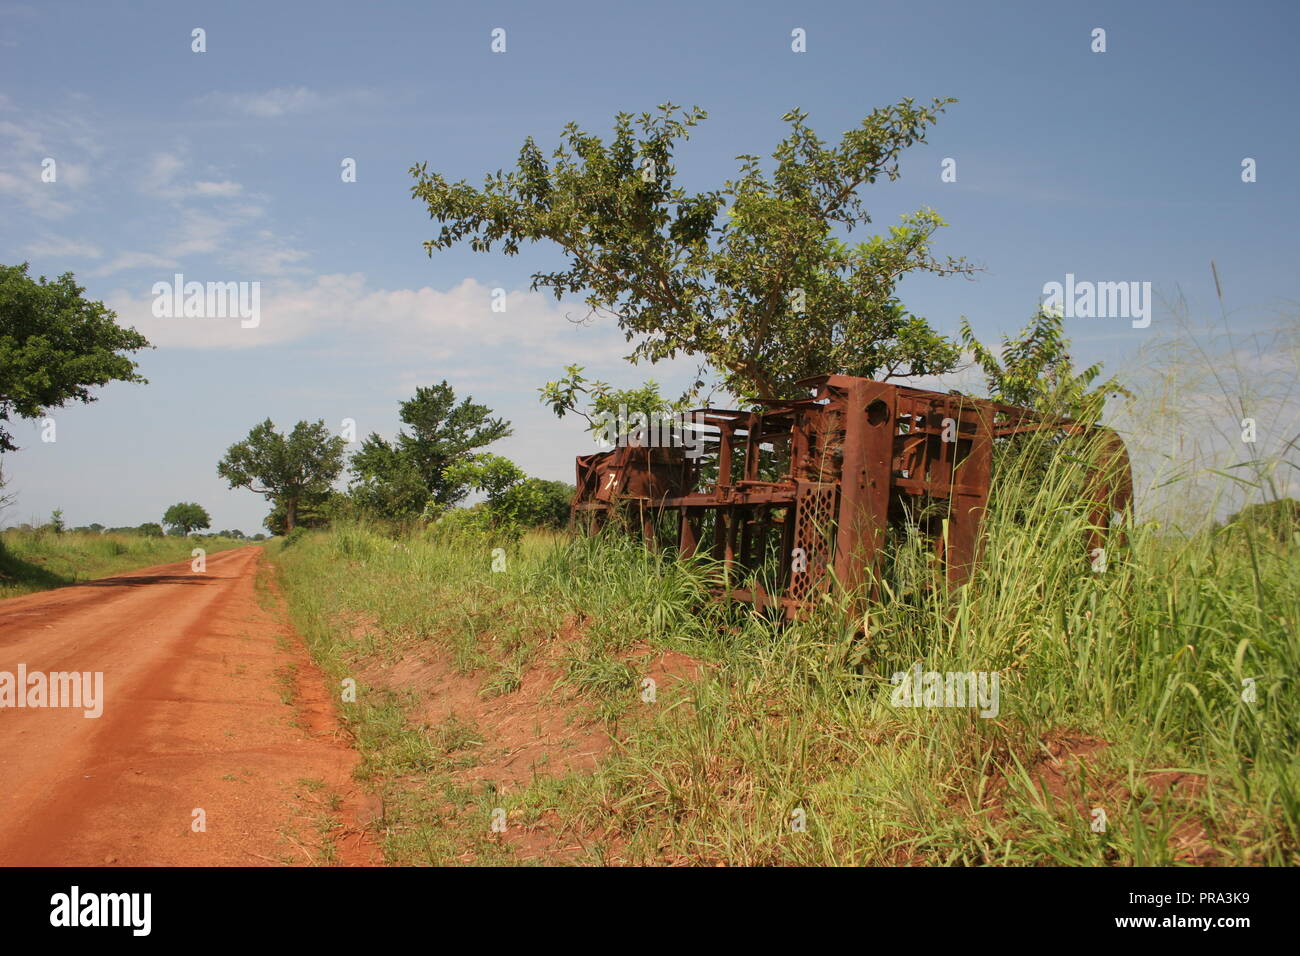 The wreckage of a vehicle along the Atiak- Gulu highway, where The Lords Resistance Army laid many deadly ambushes during its insurgency. Stock Photo